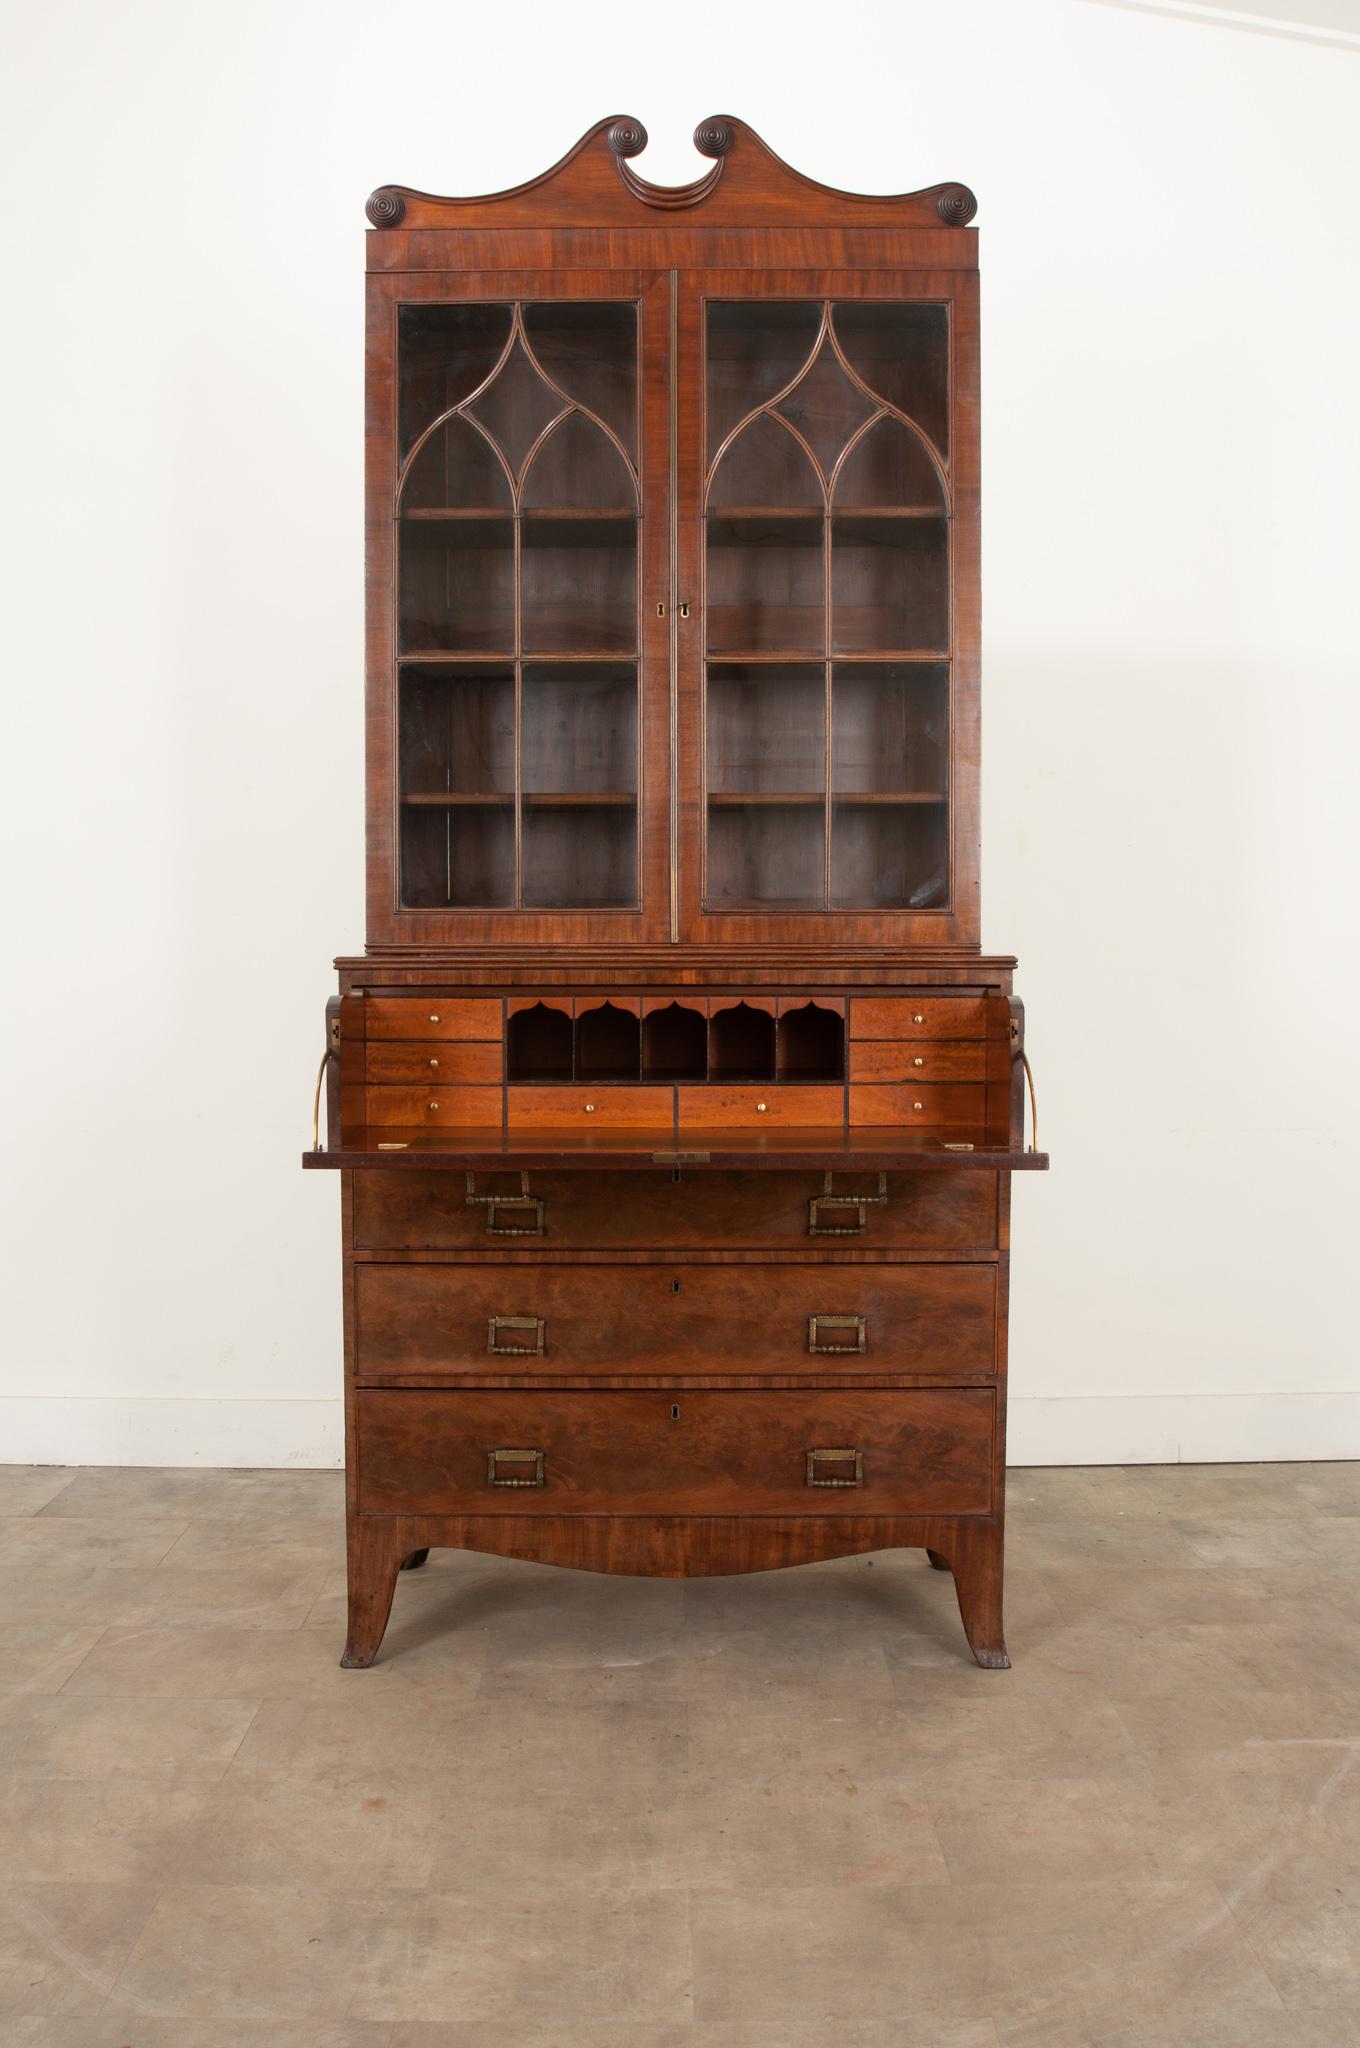 A fine English mahogany secretary, done in the Regency style circa 1830. This outstanding desk has an upper body for storage and display. There are three adjustable finished shelves situated behind the styled doors with original glass. The doors